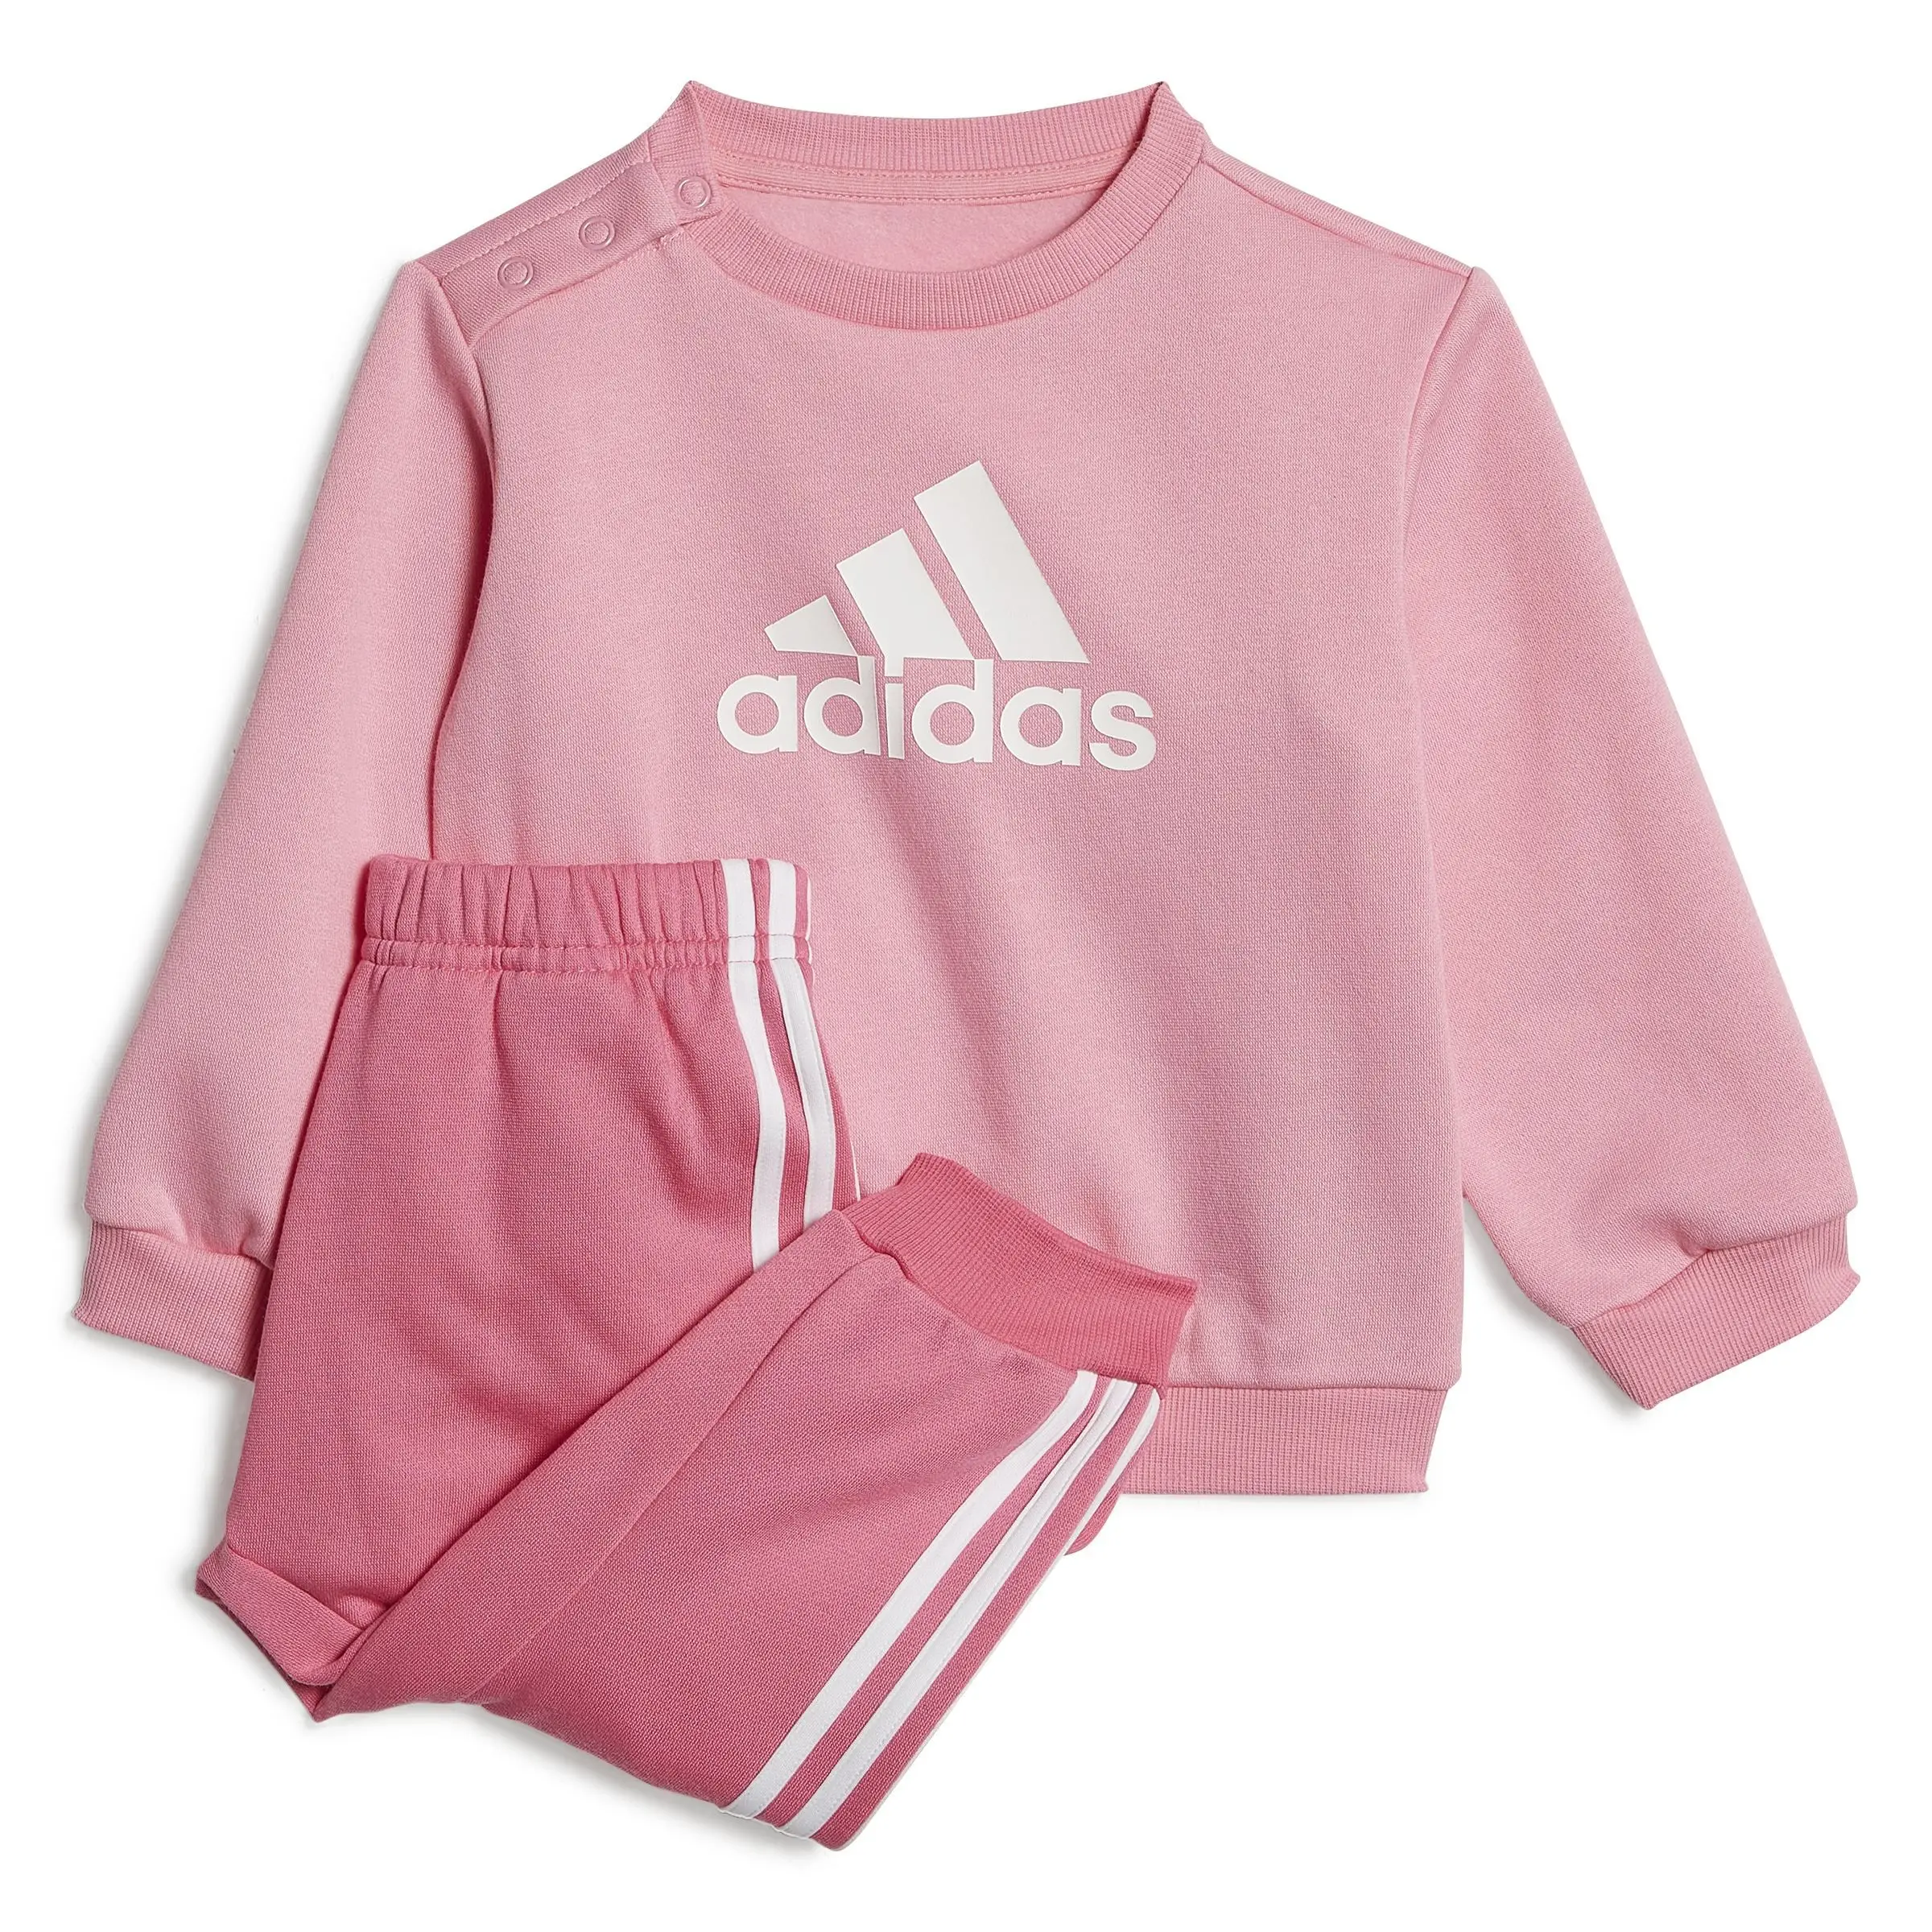 ADIDAS BABY trouser, I BOS LOGO JOG,HM8941, cotton BABY trucksuit composed  of closed sweatshirt with collar to the box and brand LOGO on the chest.  Cuff pants with three bands of the